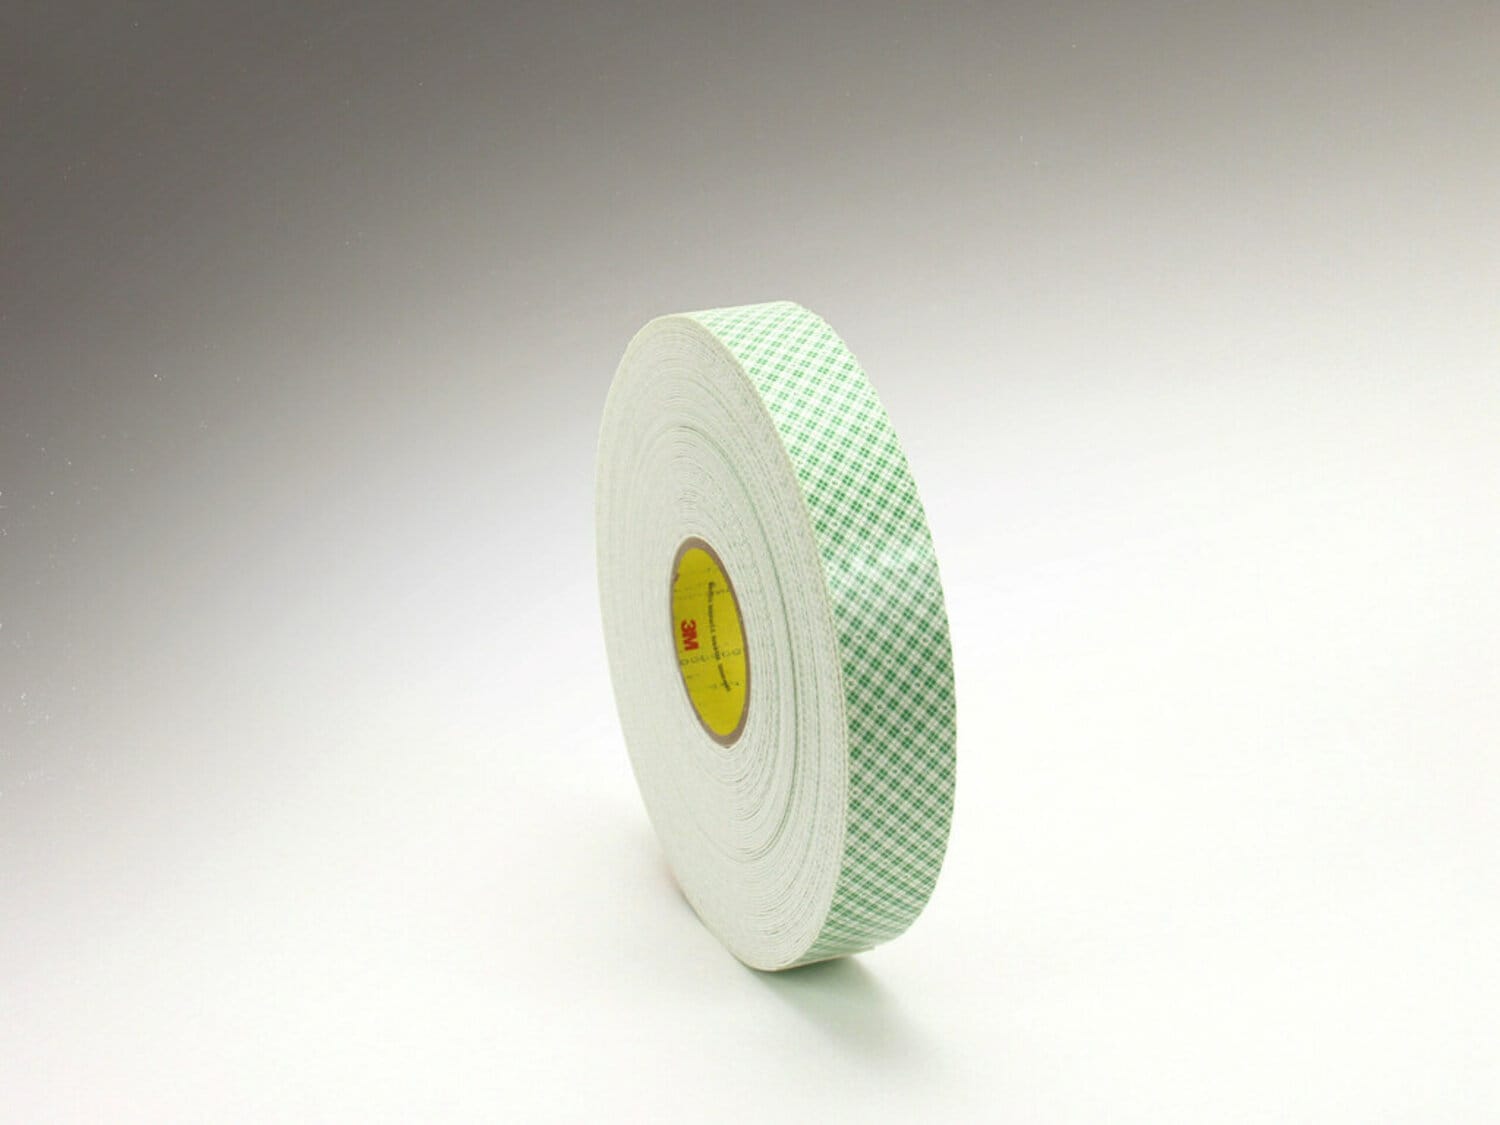 7010299637 - 3M Double Coated Urethane Foam Tape 4016, Off White, 1/4 in x 36 yd, 62
mil, 36 rolls per case